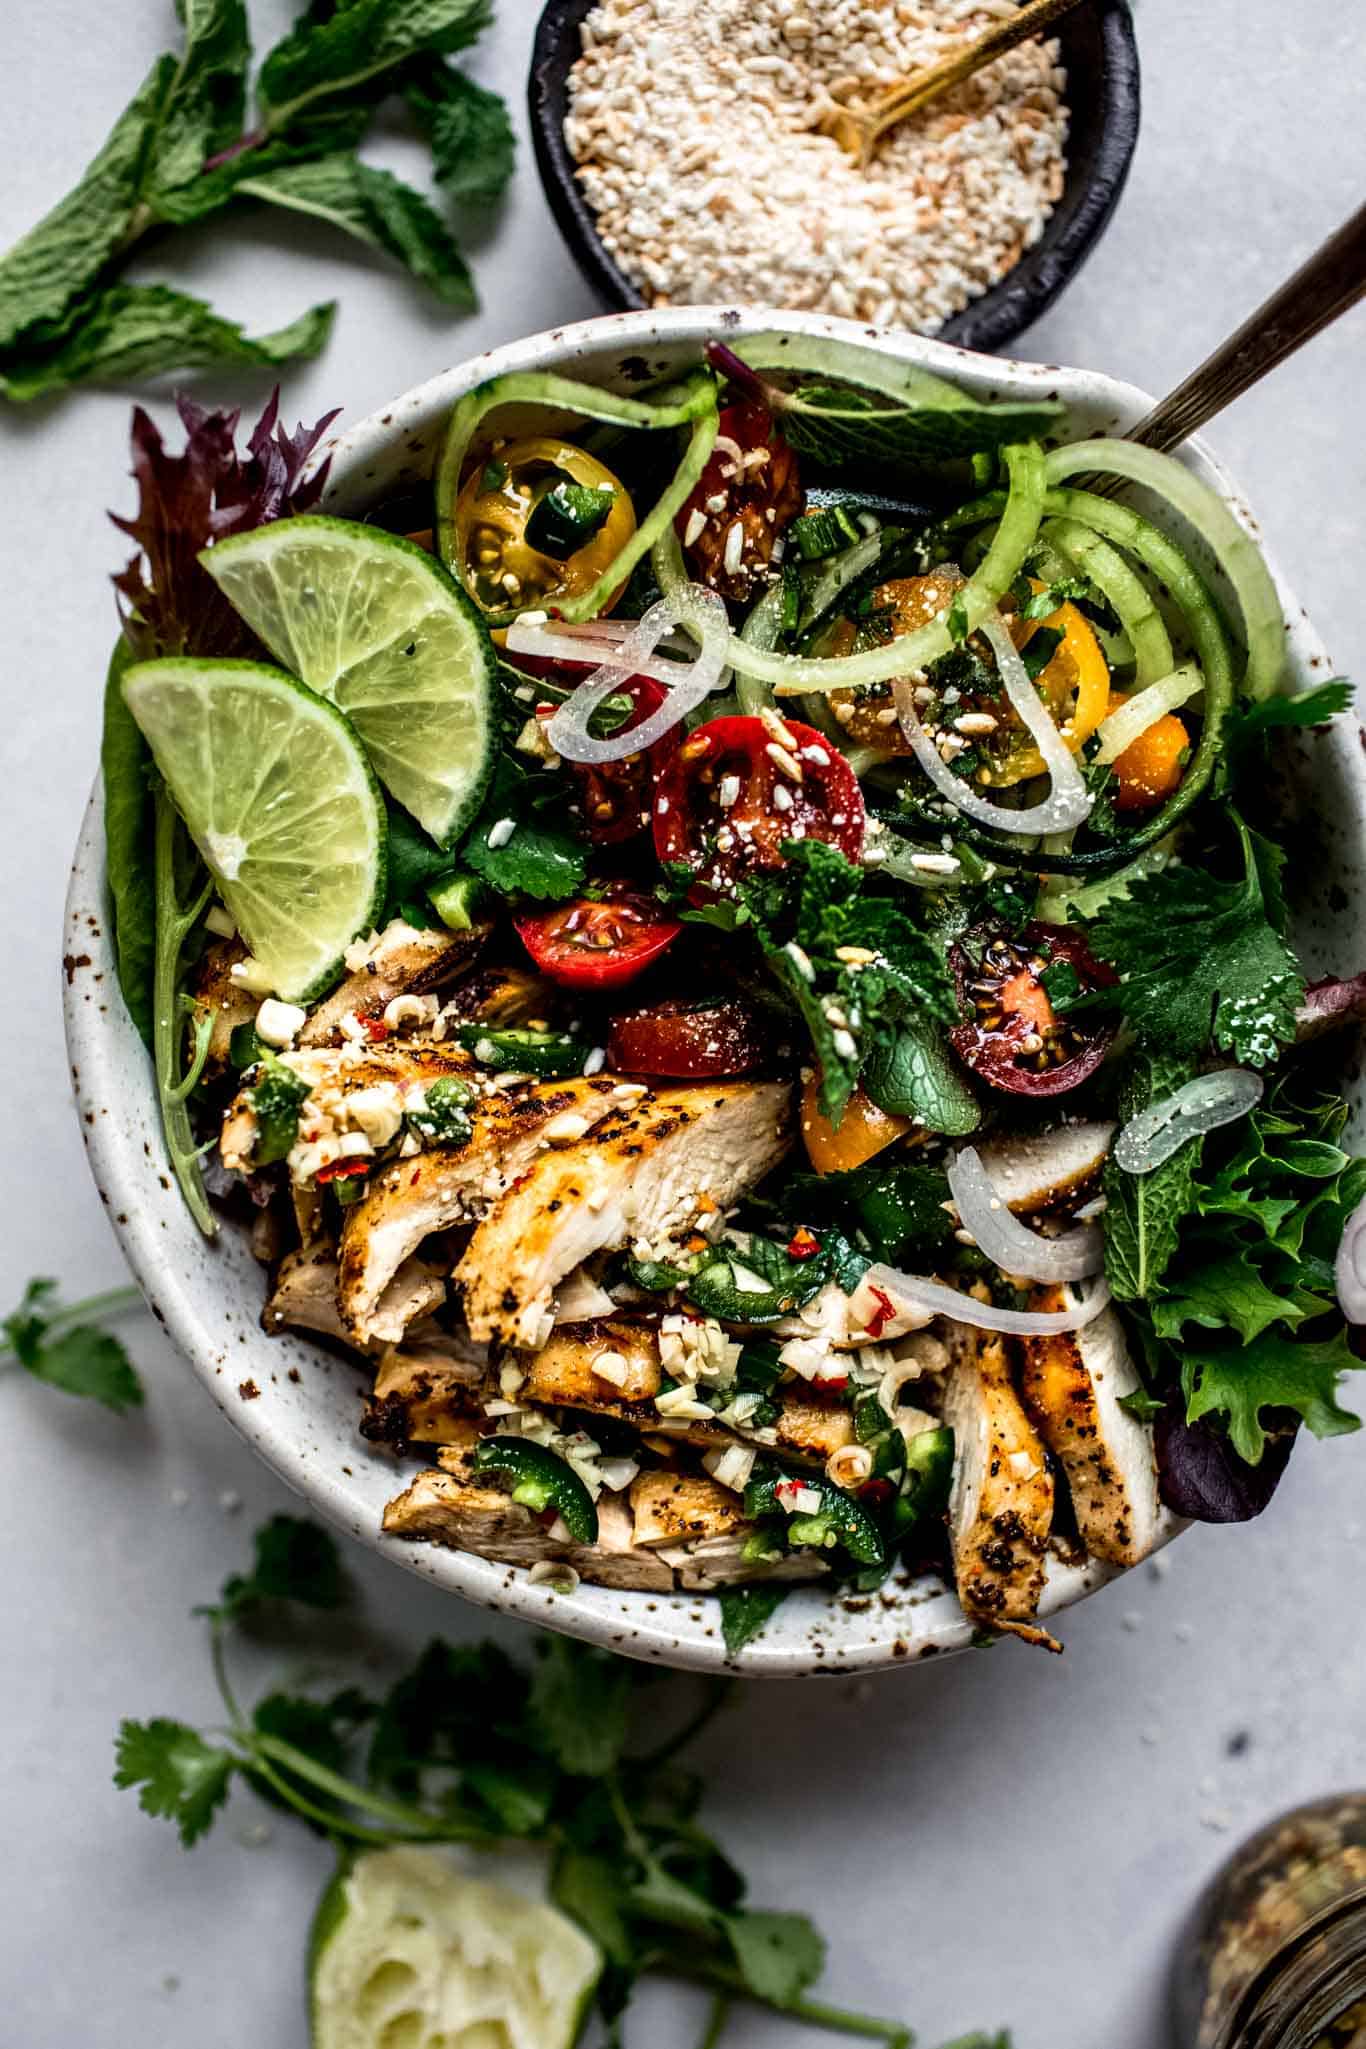 Colourful bowl of Thai chicken salad and greens with slices of lime on the side